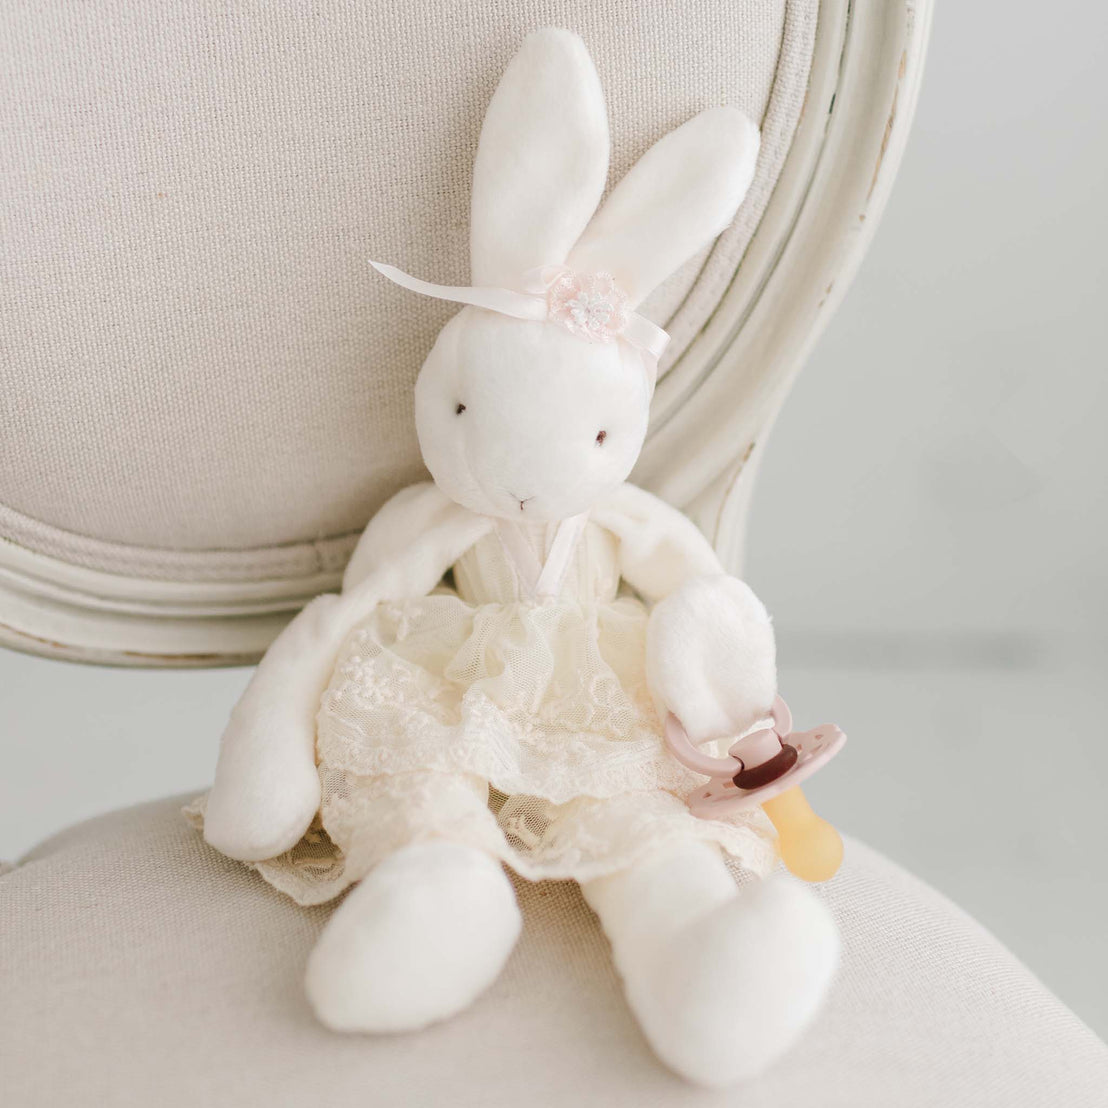 A white plush bunny toy wearing a lace dress with a pink bow on its head sits on an off-white upholstered chair. The bunny is clutching a Jessica Silly Bunny Buddy | Pacifier Holder.